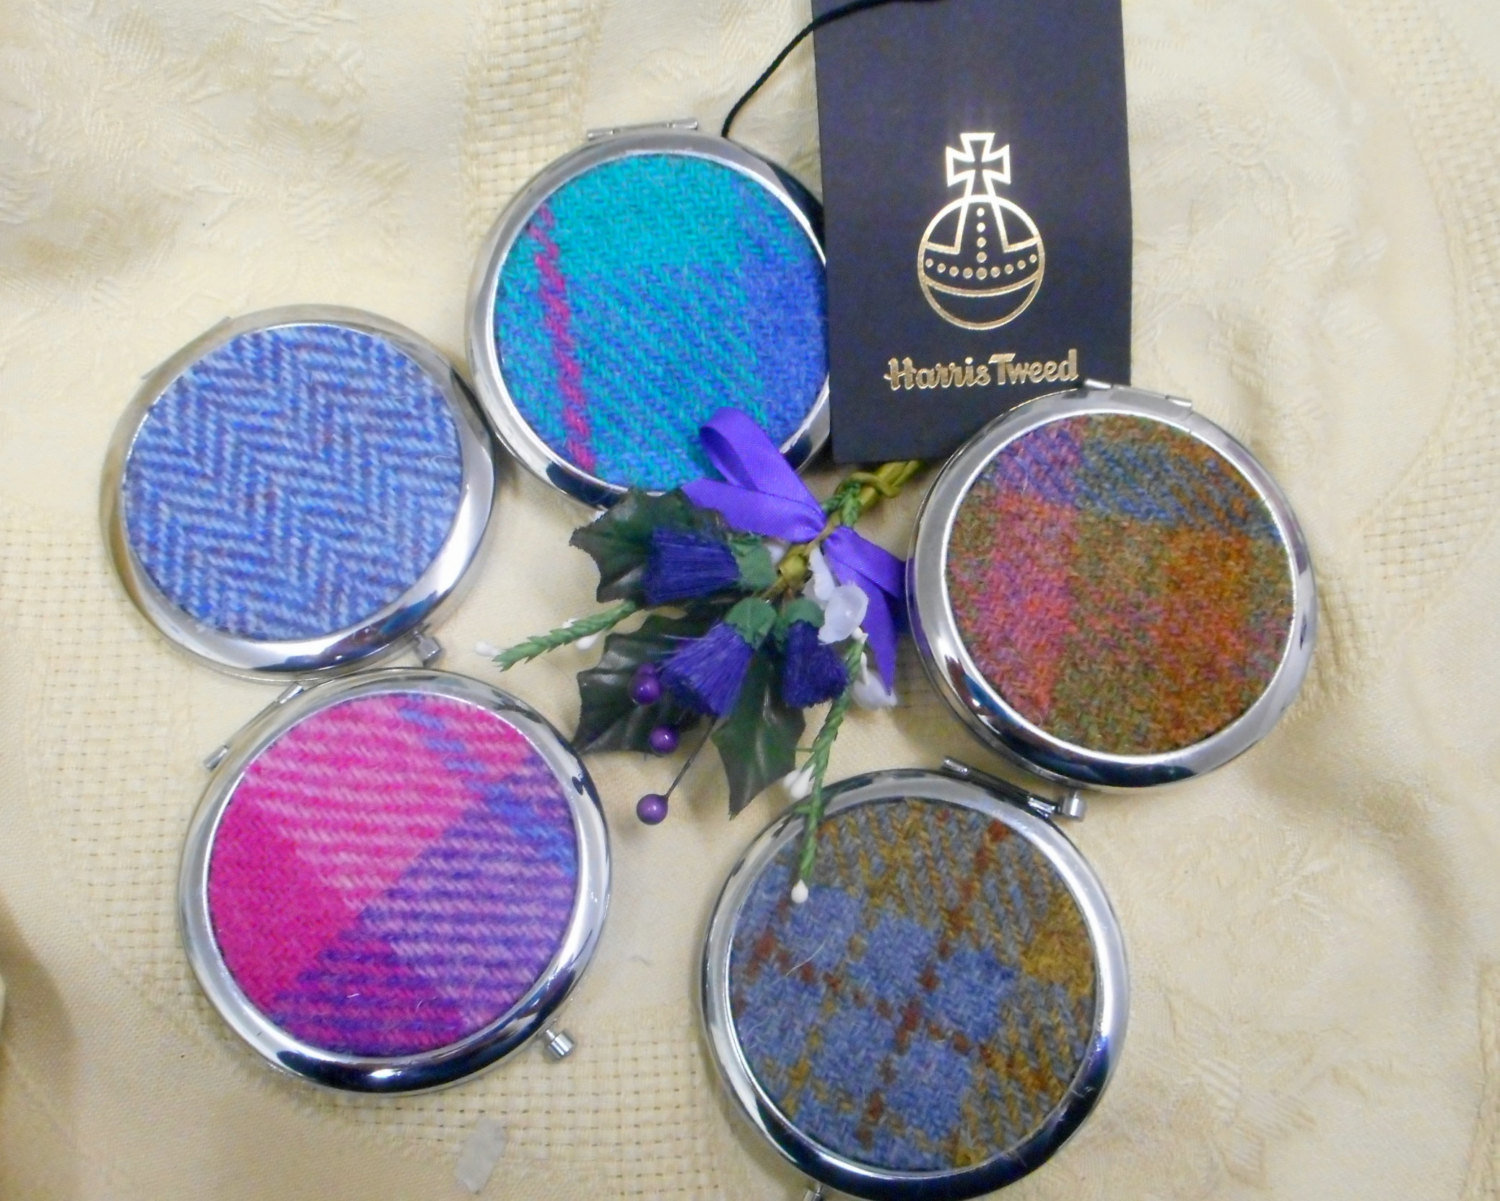 Baby blue plaid Harris Tweed compact mirror  womens gift for Mother, sister, best friend, handbag or pocker accessory, made in Scotland UK